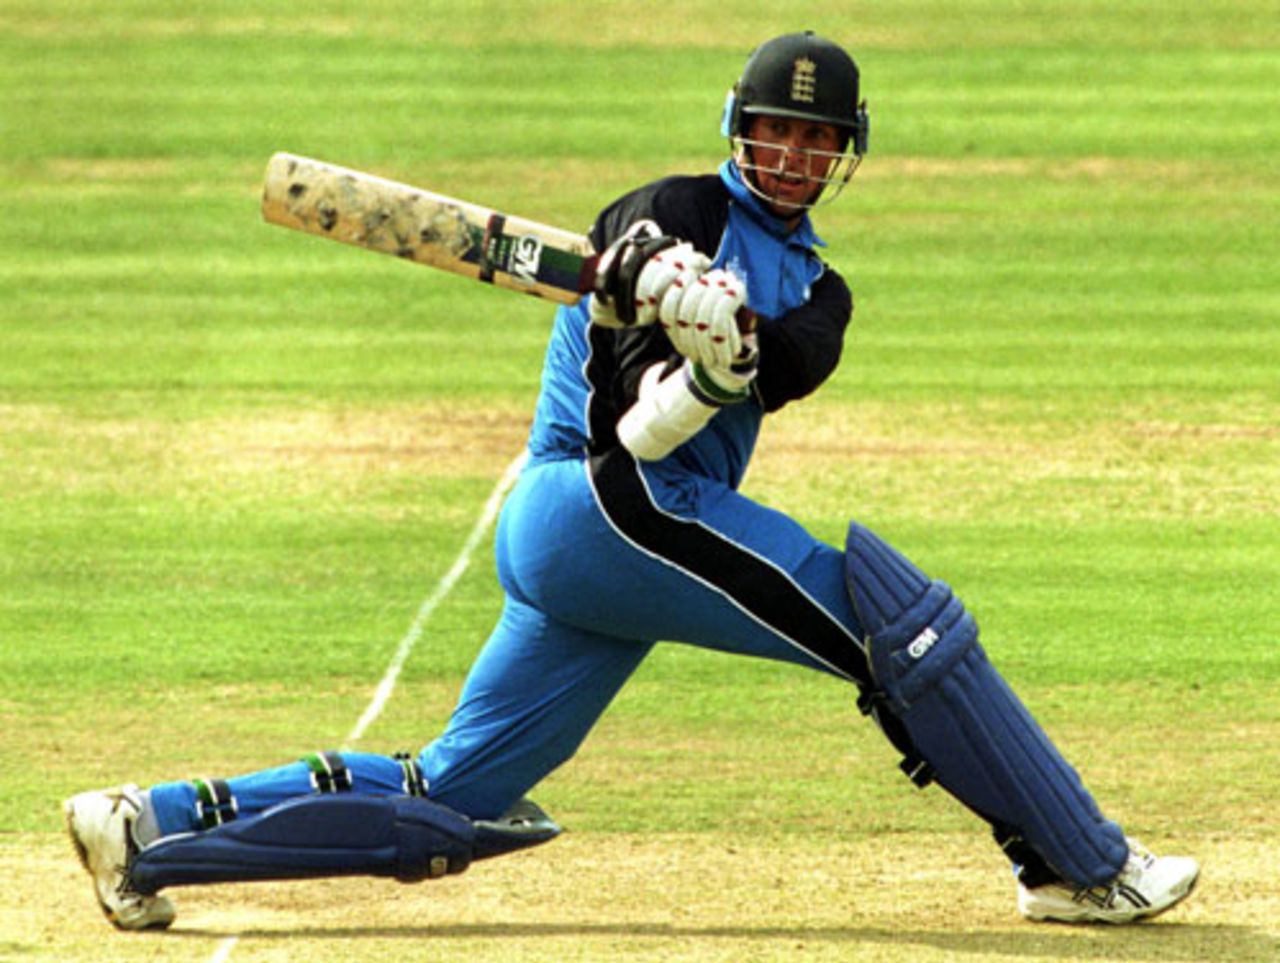 Trescothick lofts a ball over midwicket  on his way to a century, 4th ODI at Lords, June 12, 2001